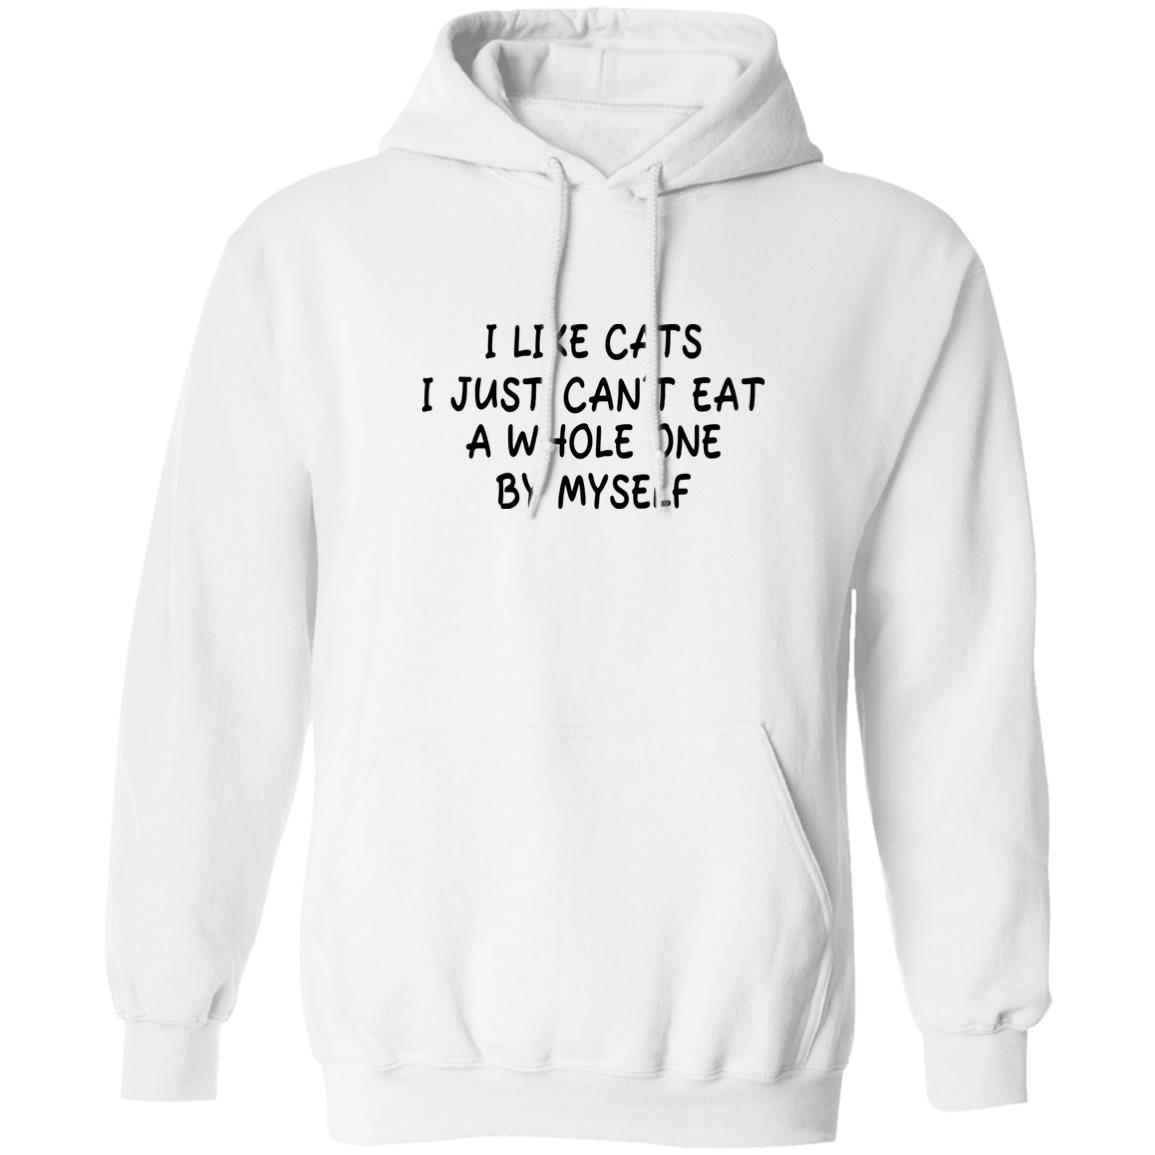 I Like Cats I Just Can’t Eat A Whole One By Myself Shirt 1